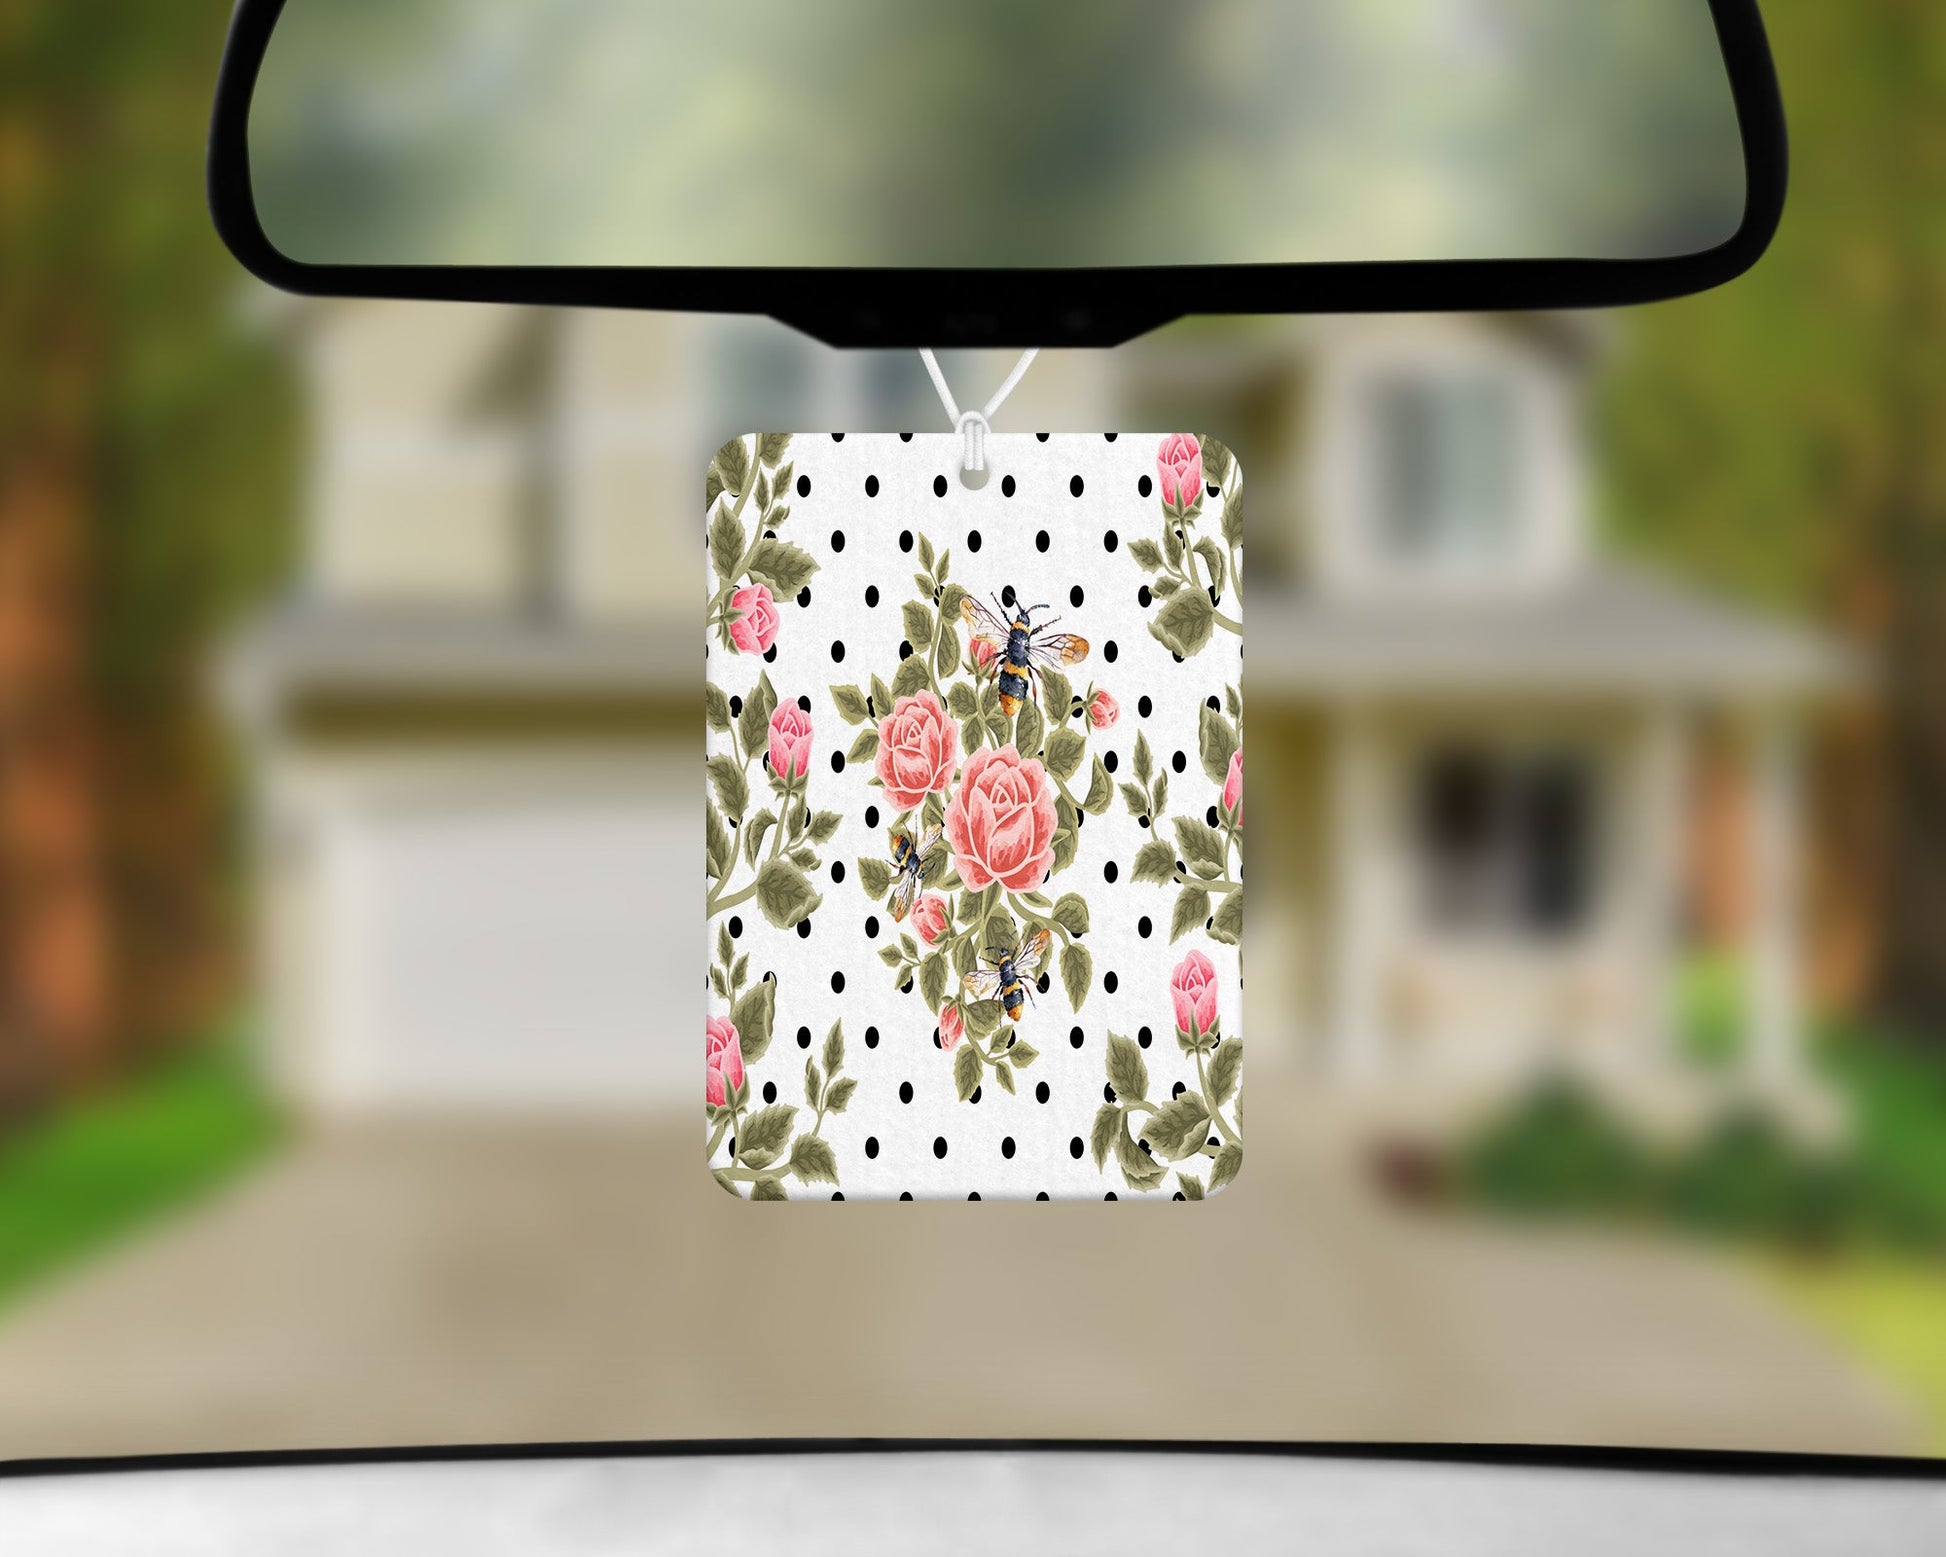 Roses|Freshie|Includes Scent Bottle - Vehicle Air Freshener